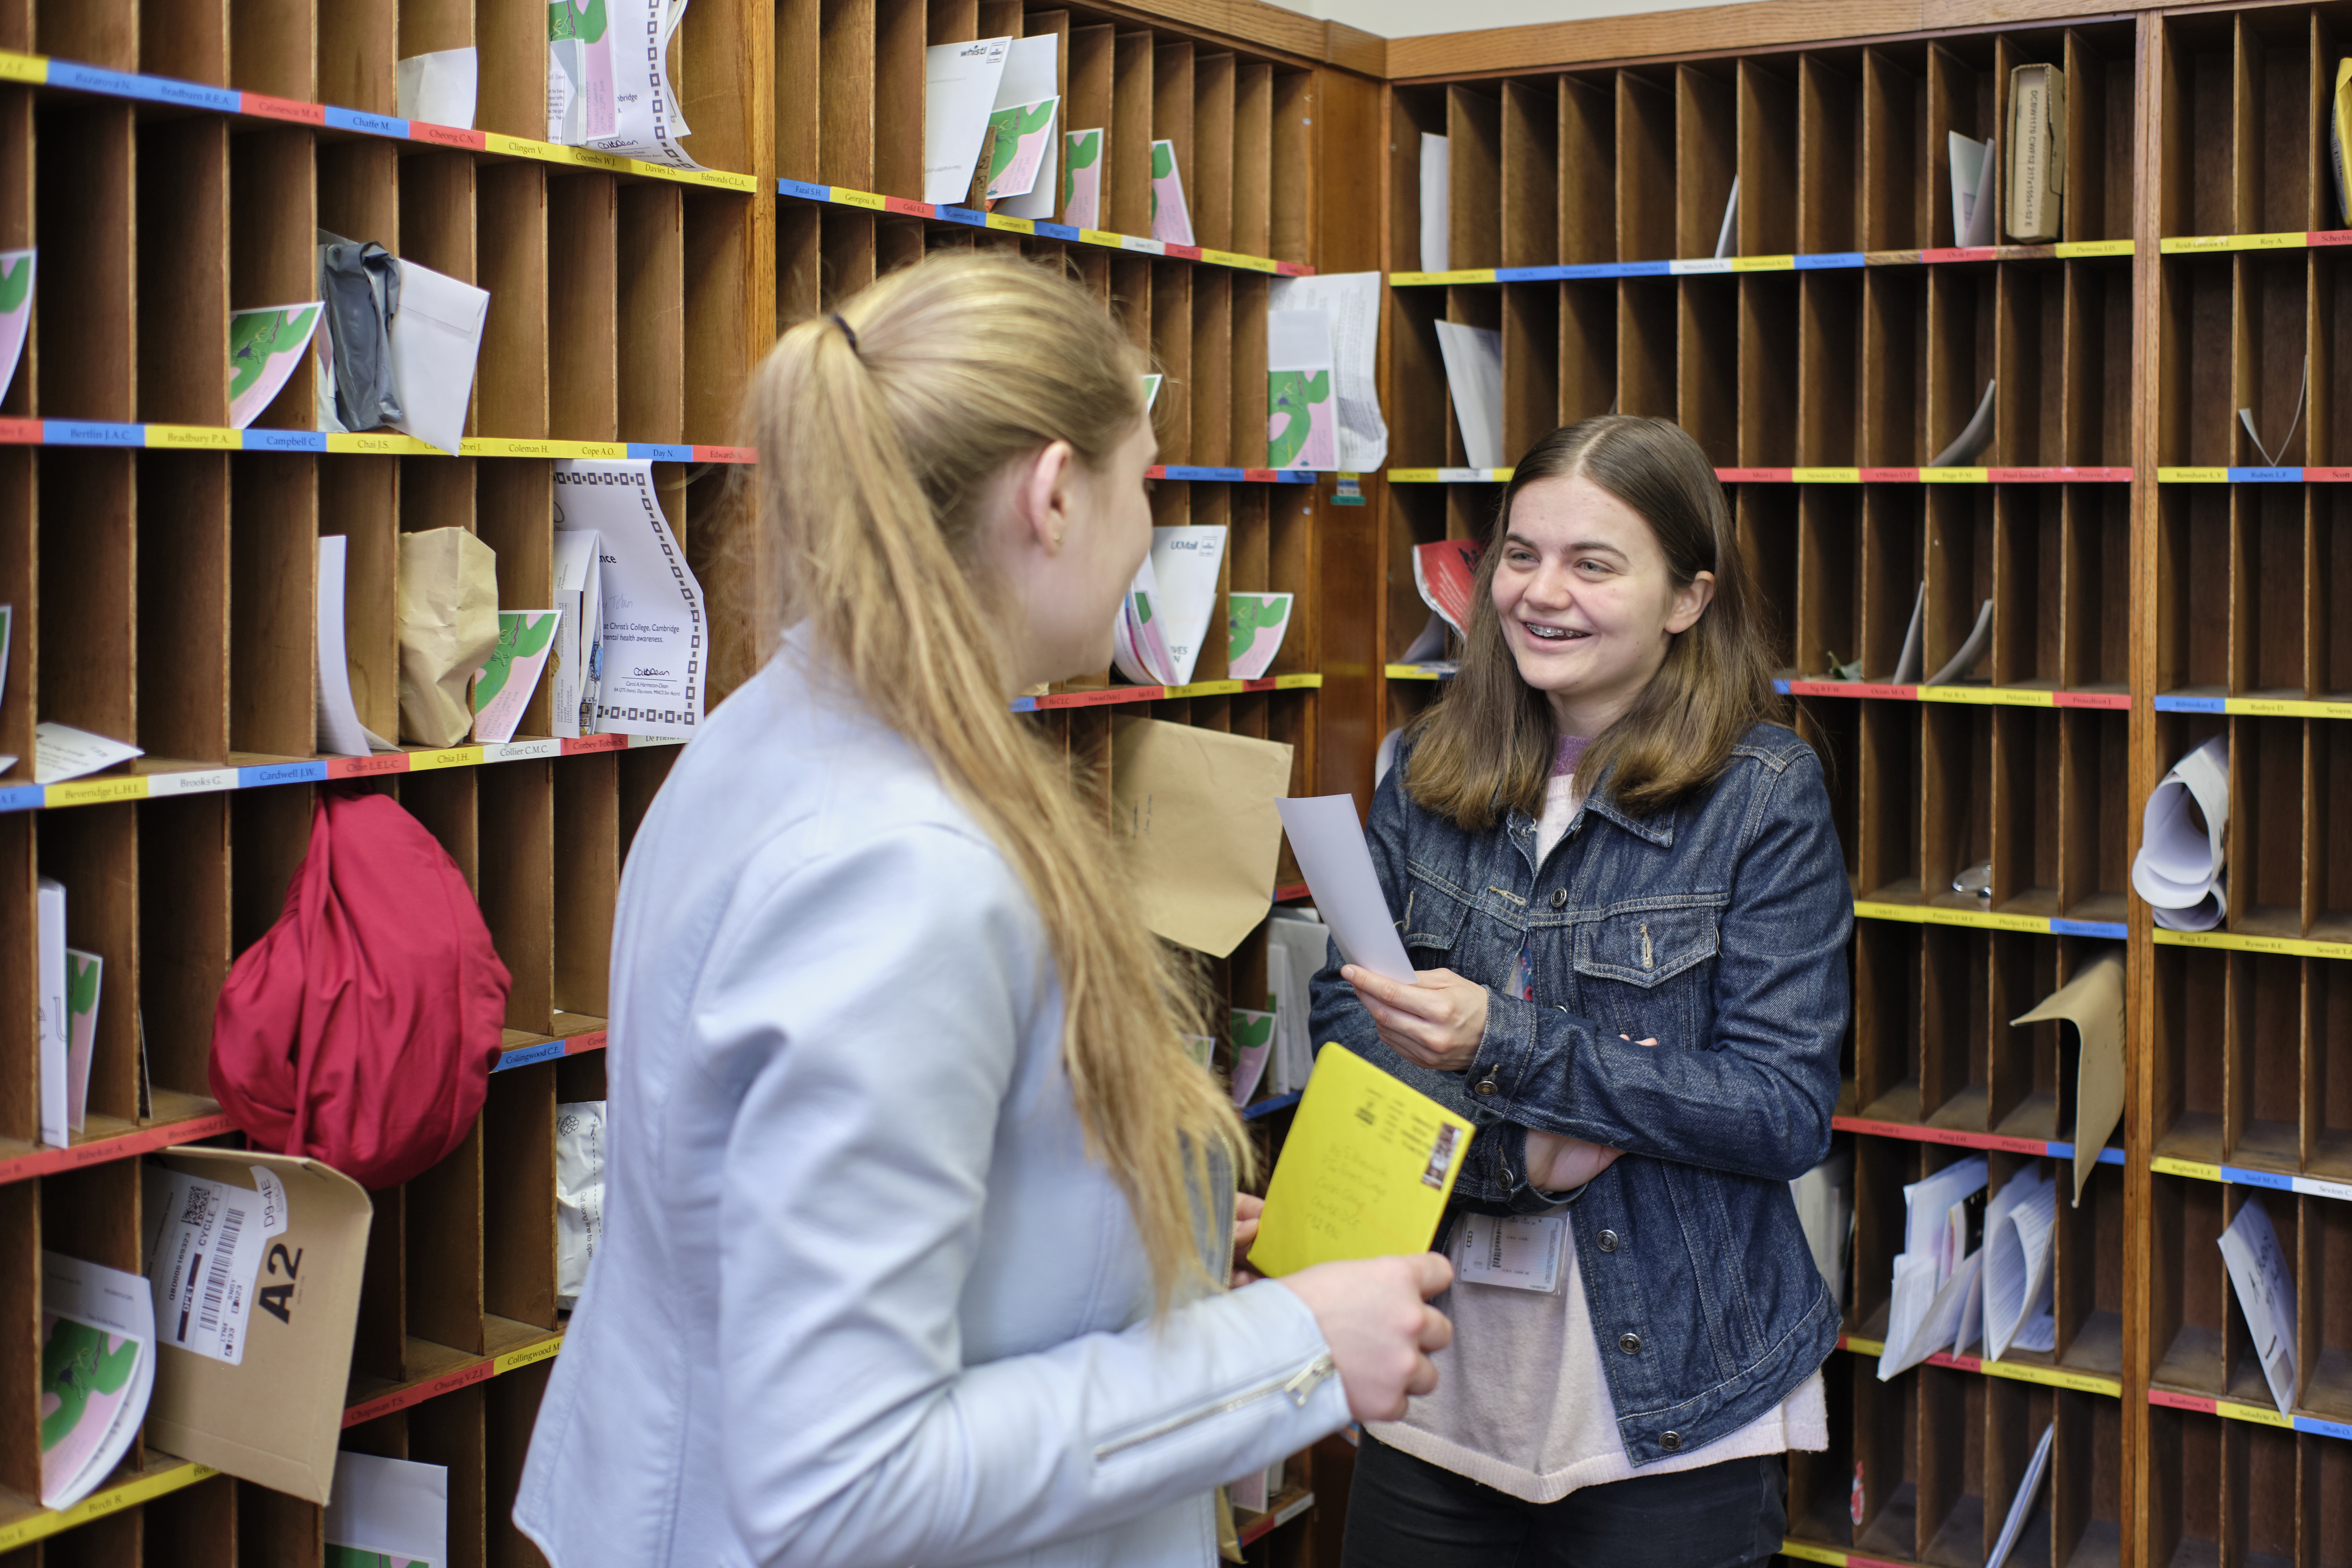 Students chatting by the pigeon holes